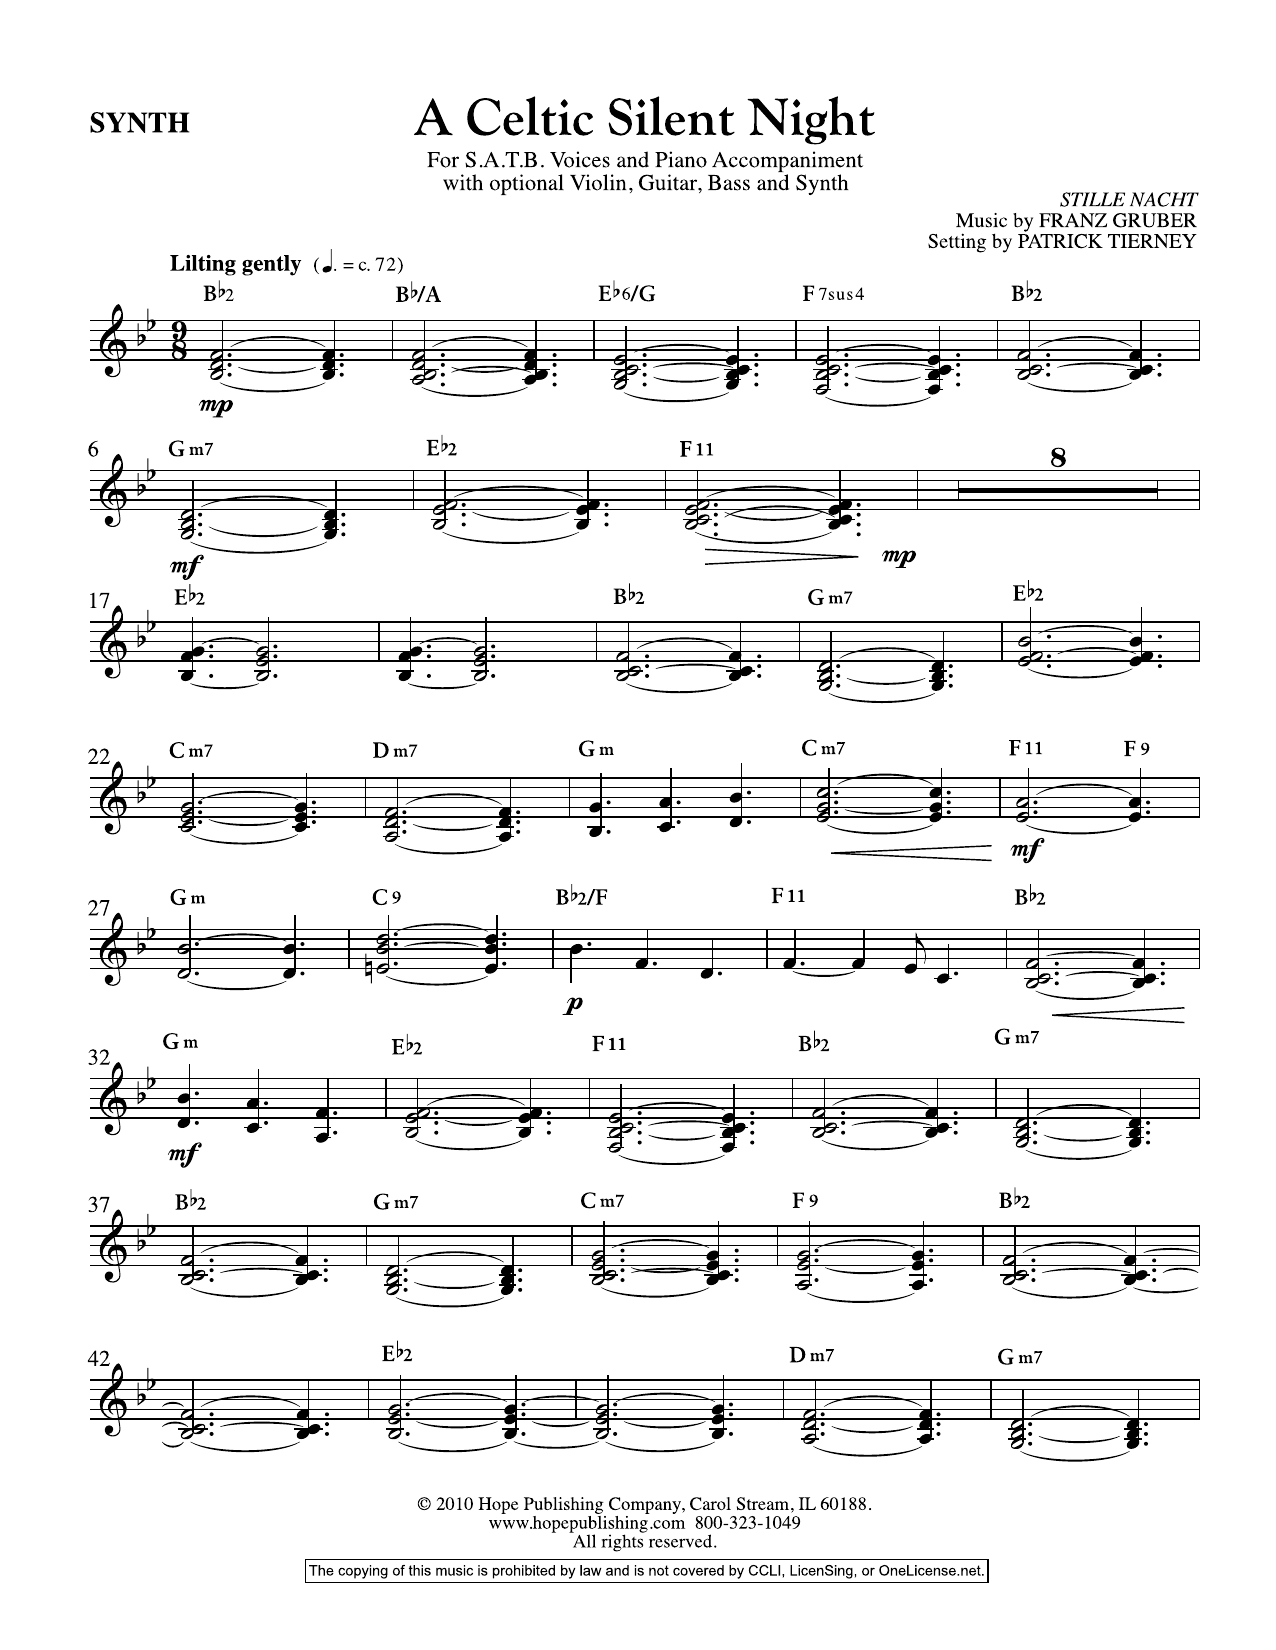 Download Franz Gruber A Celtic Silent Night - Synthesizer Sheet Music